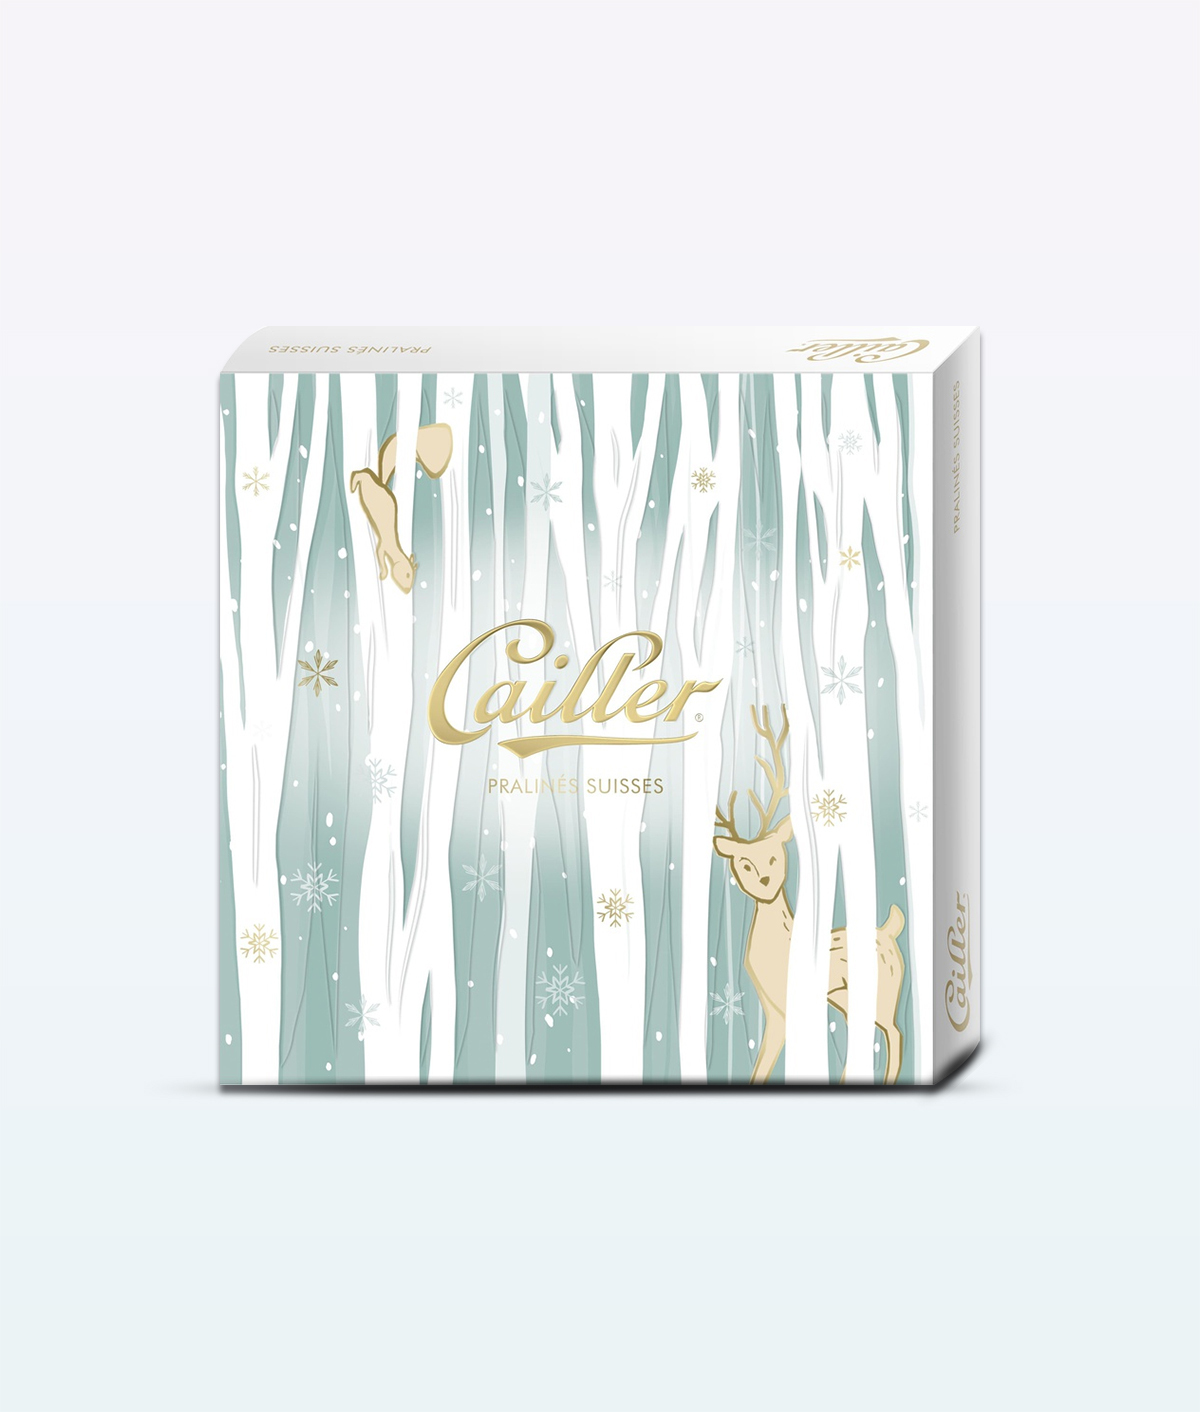 cailler-cure-pralines